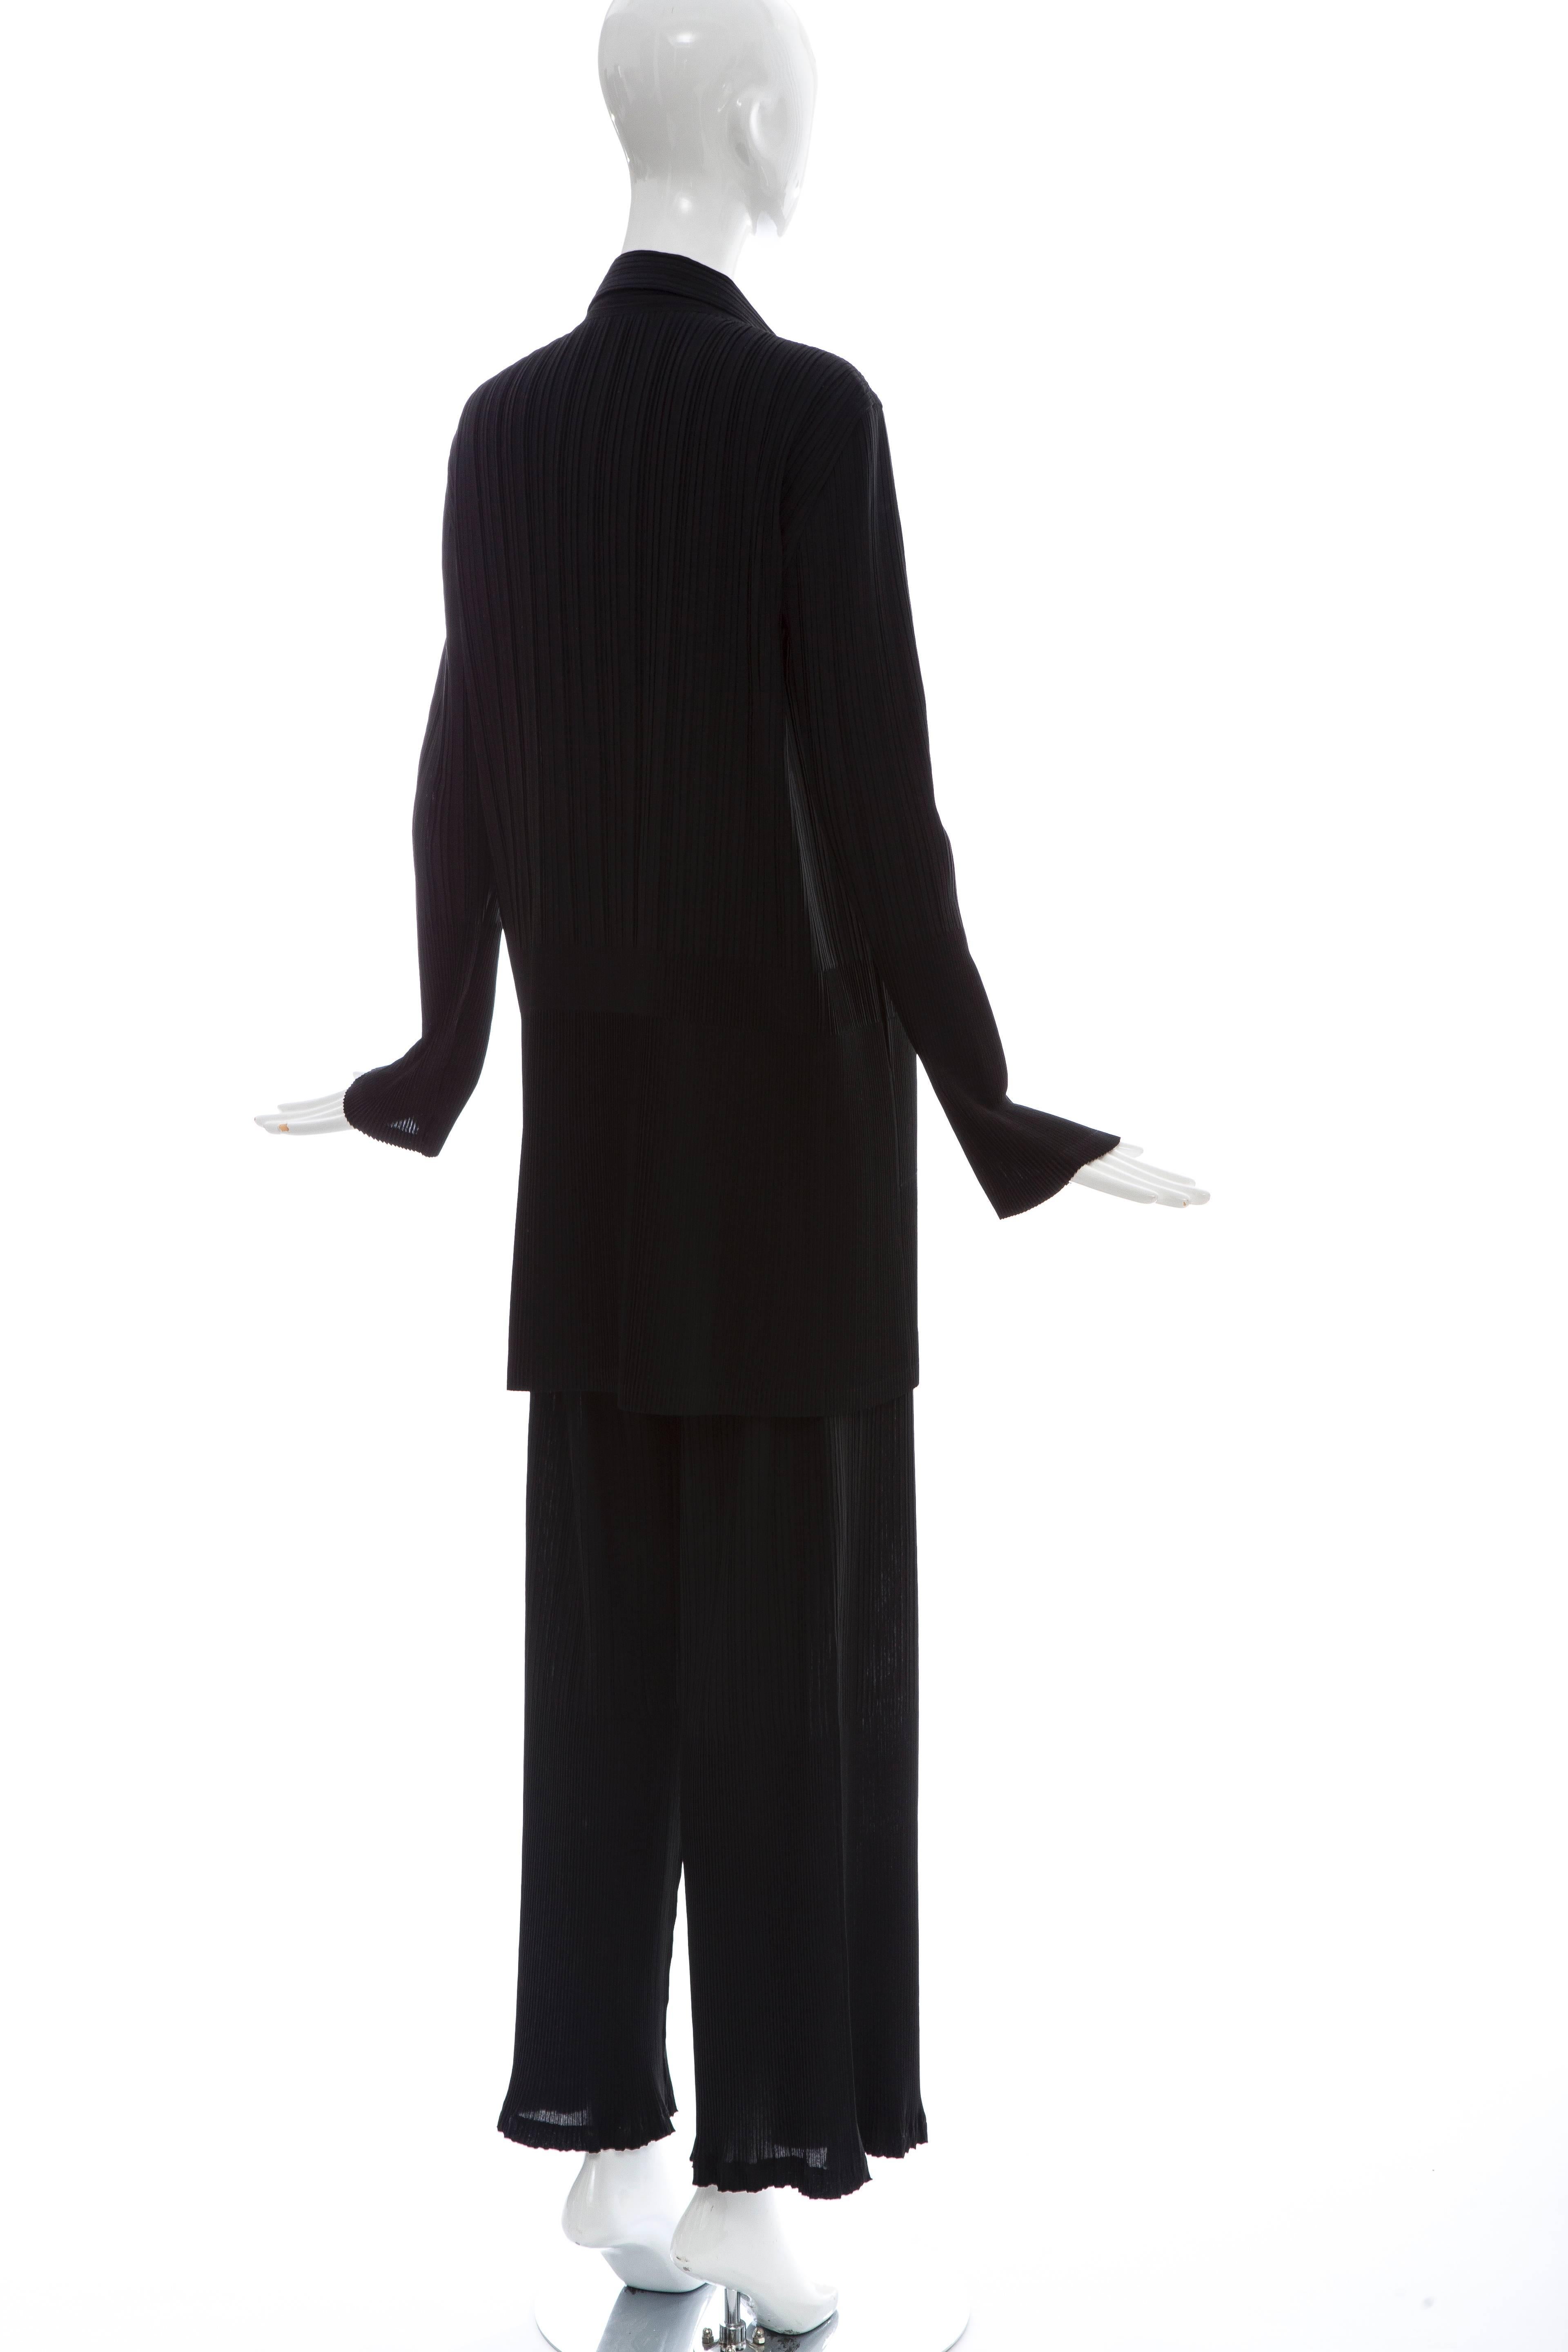 Women's Issey Miyake Black Pleated Polyester Button Front Pant Suit, Circa 1990's For Sale